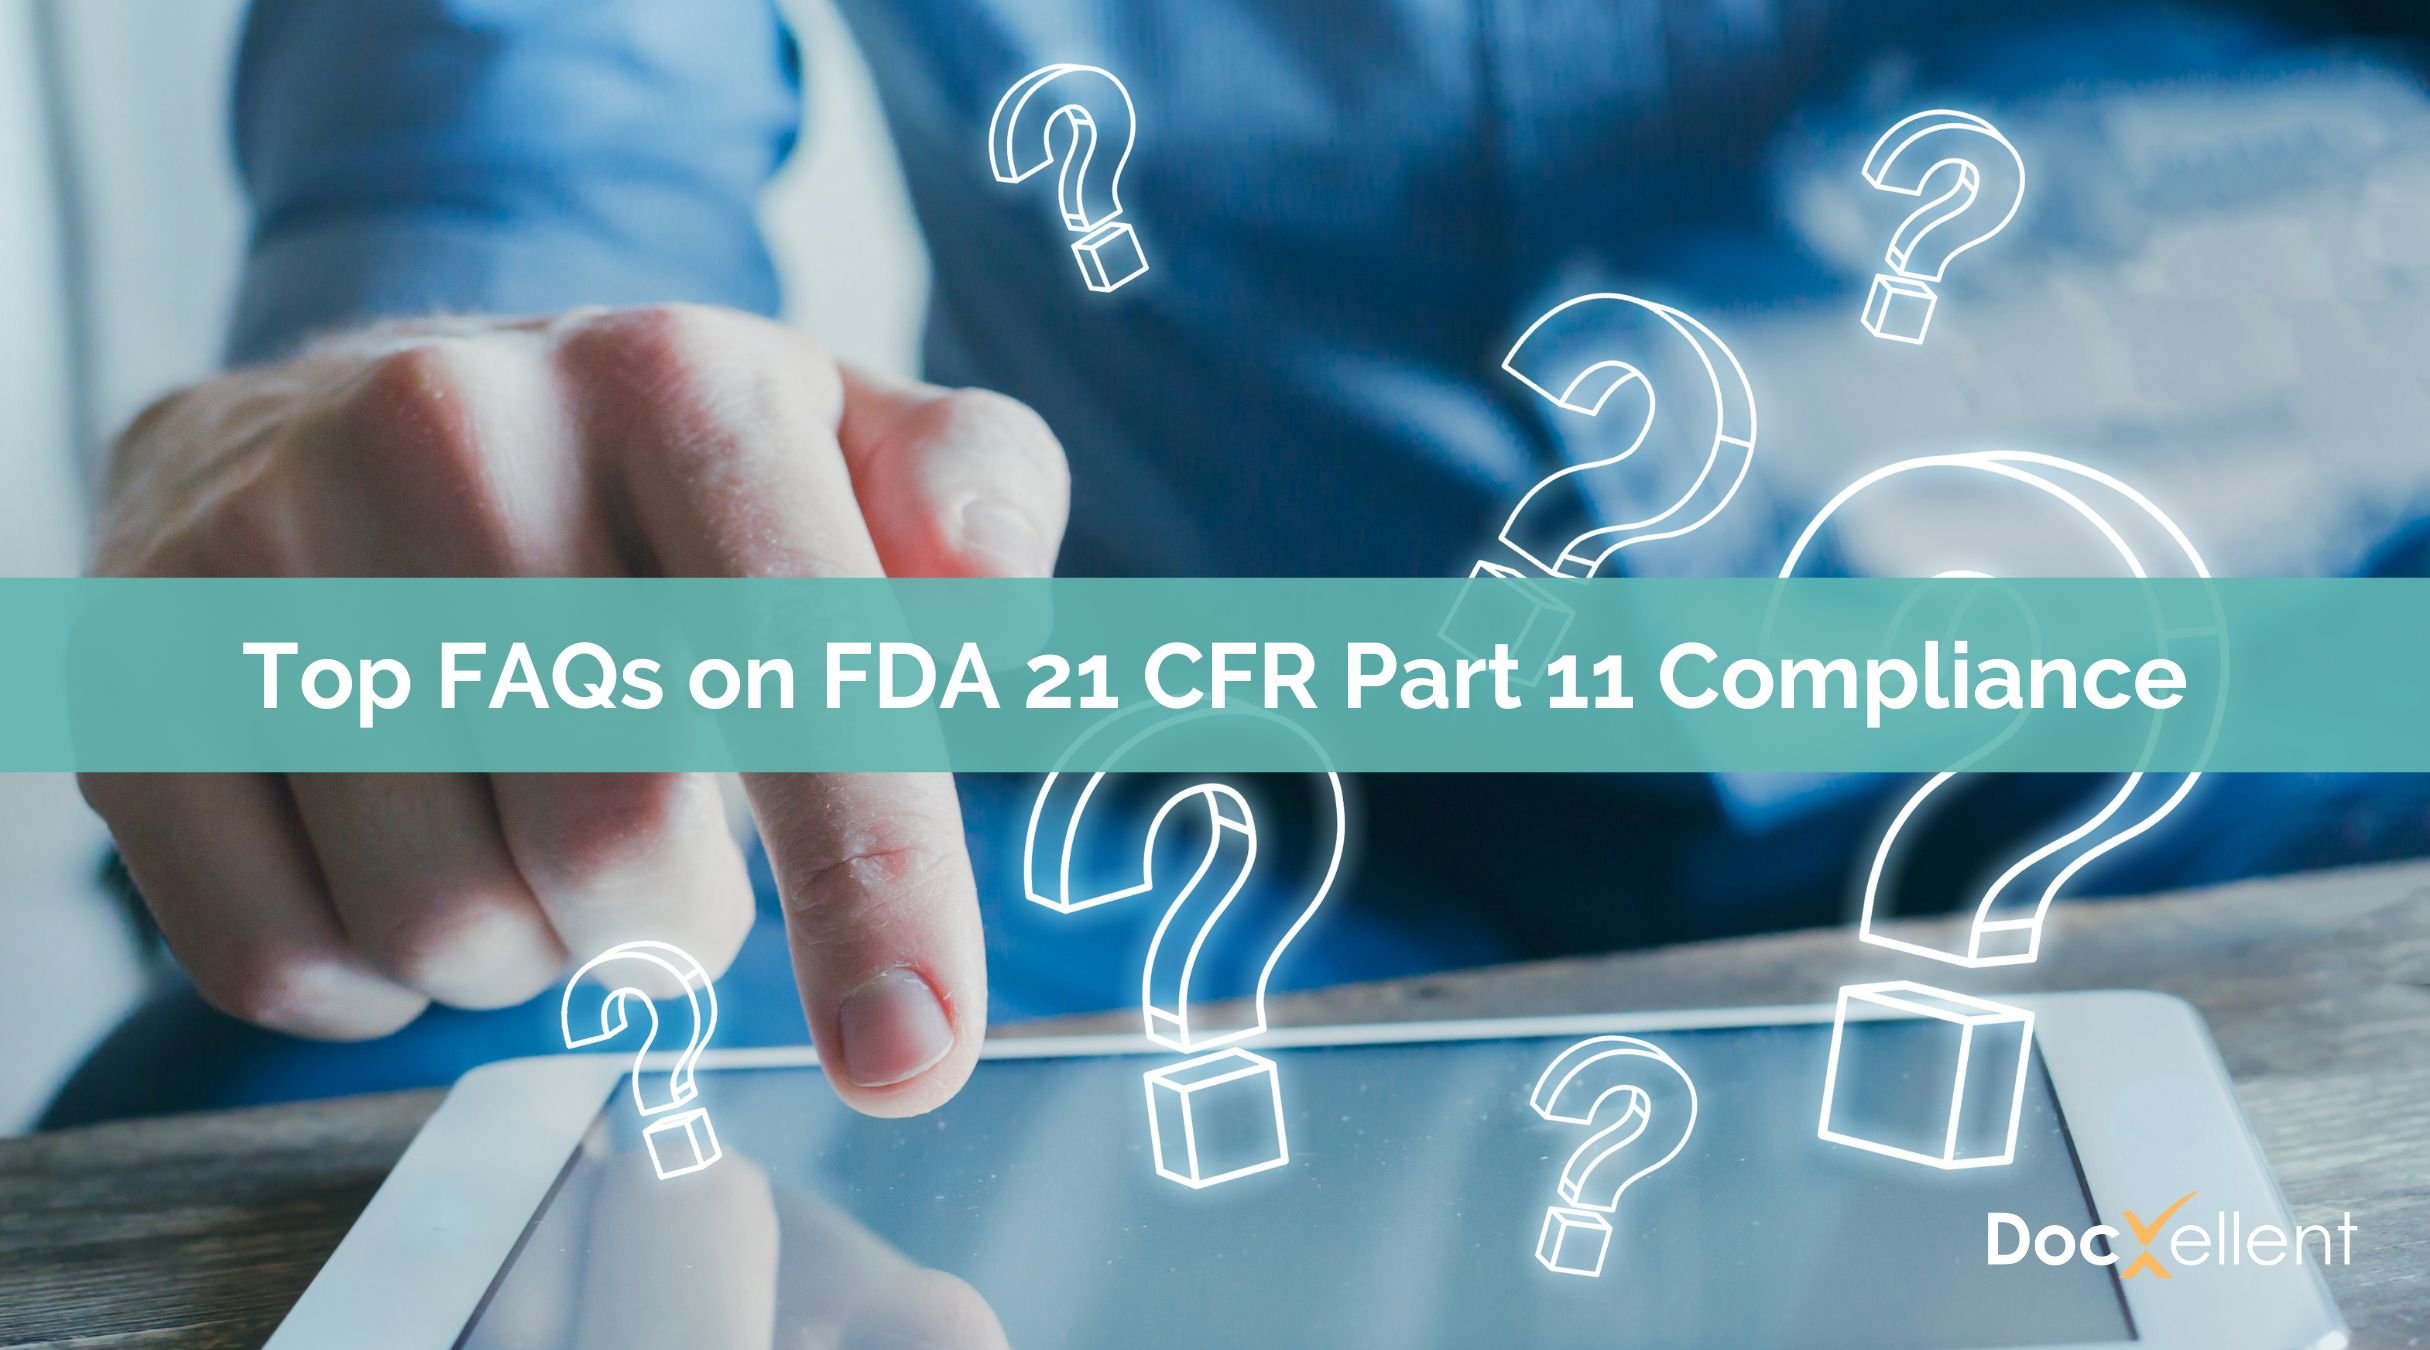 Top FAQs on FDA 21 CFR Part 11 Compliance